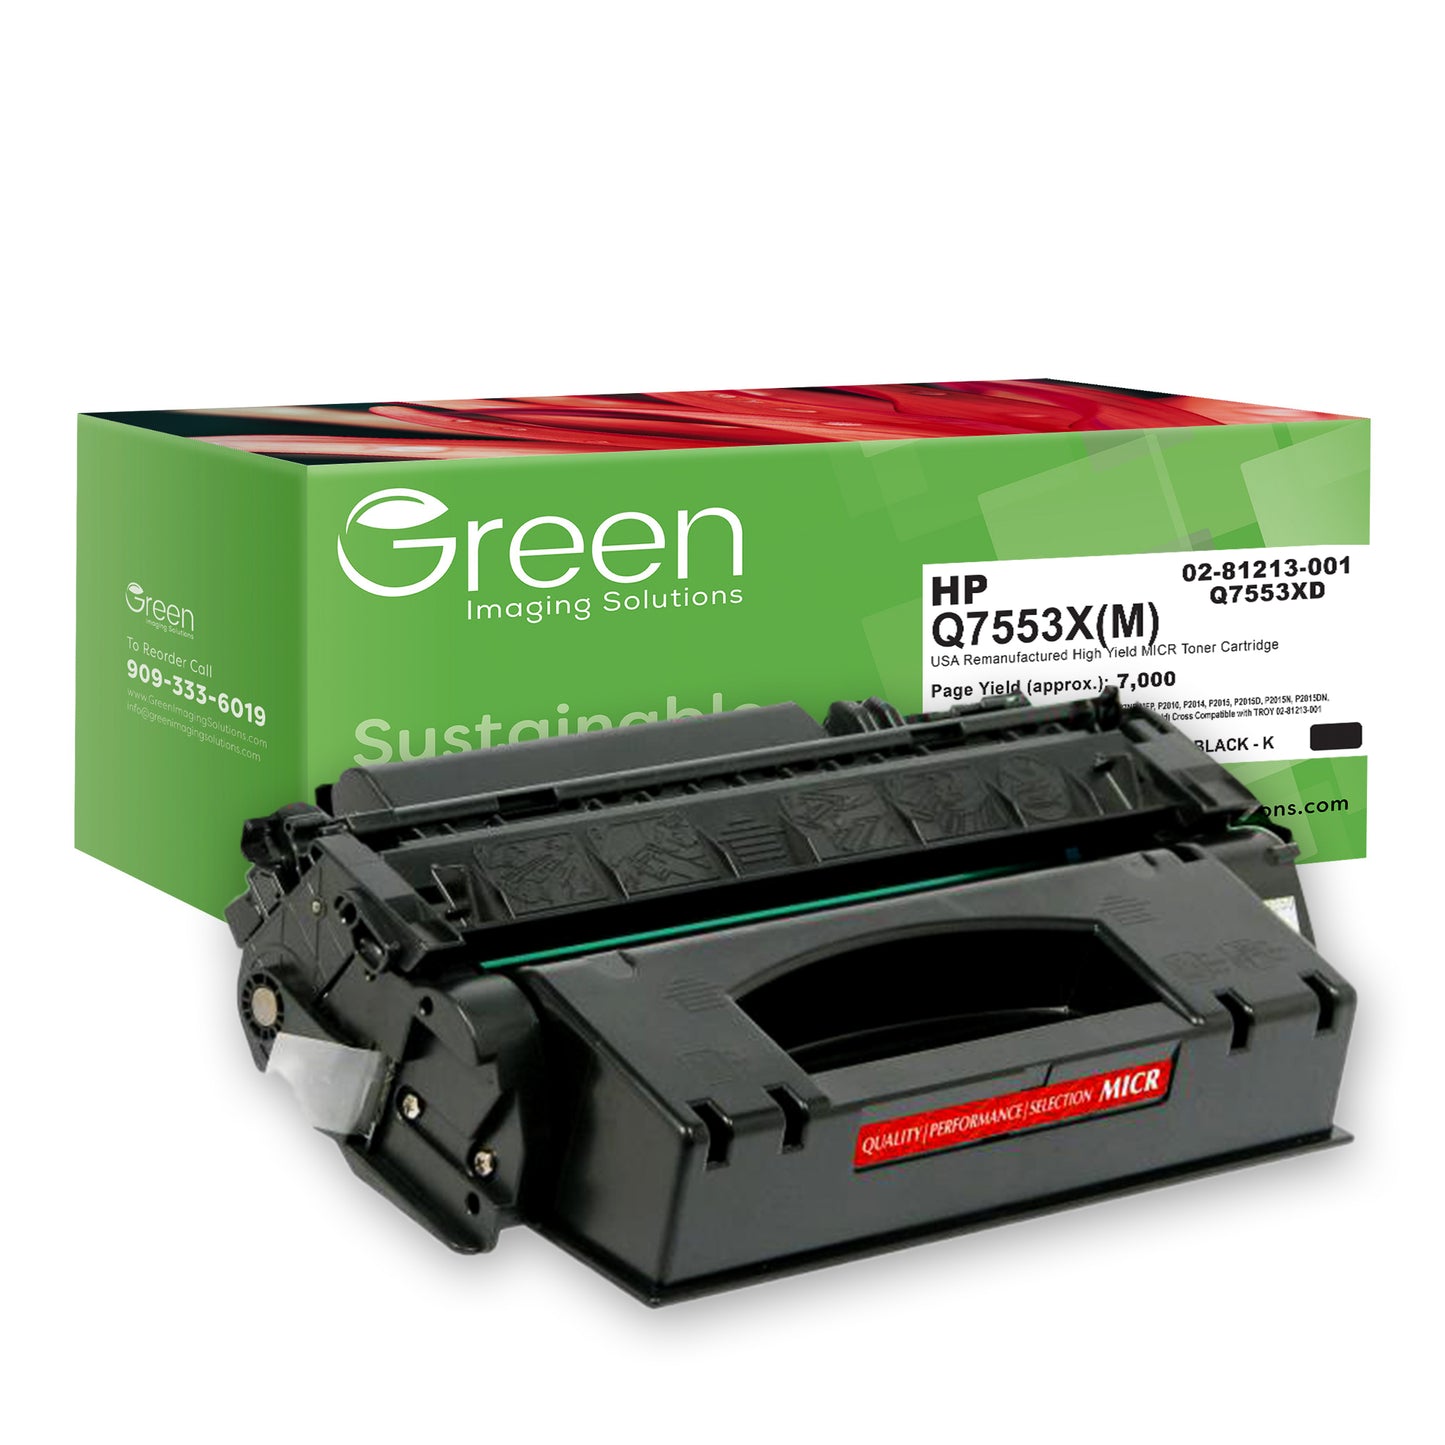 GIS USA Remanufactured High Yield MICR Toner Cartridge for HP Q7553X, TROY 02-81213-001